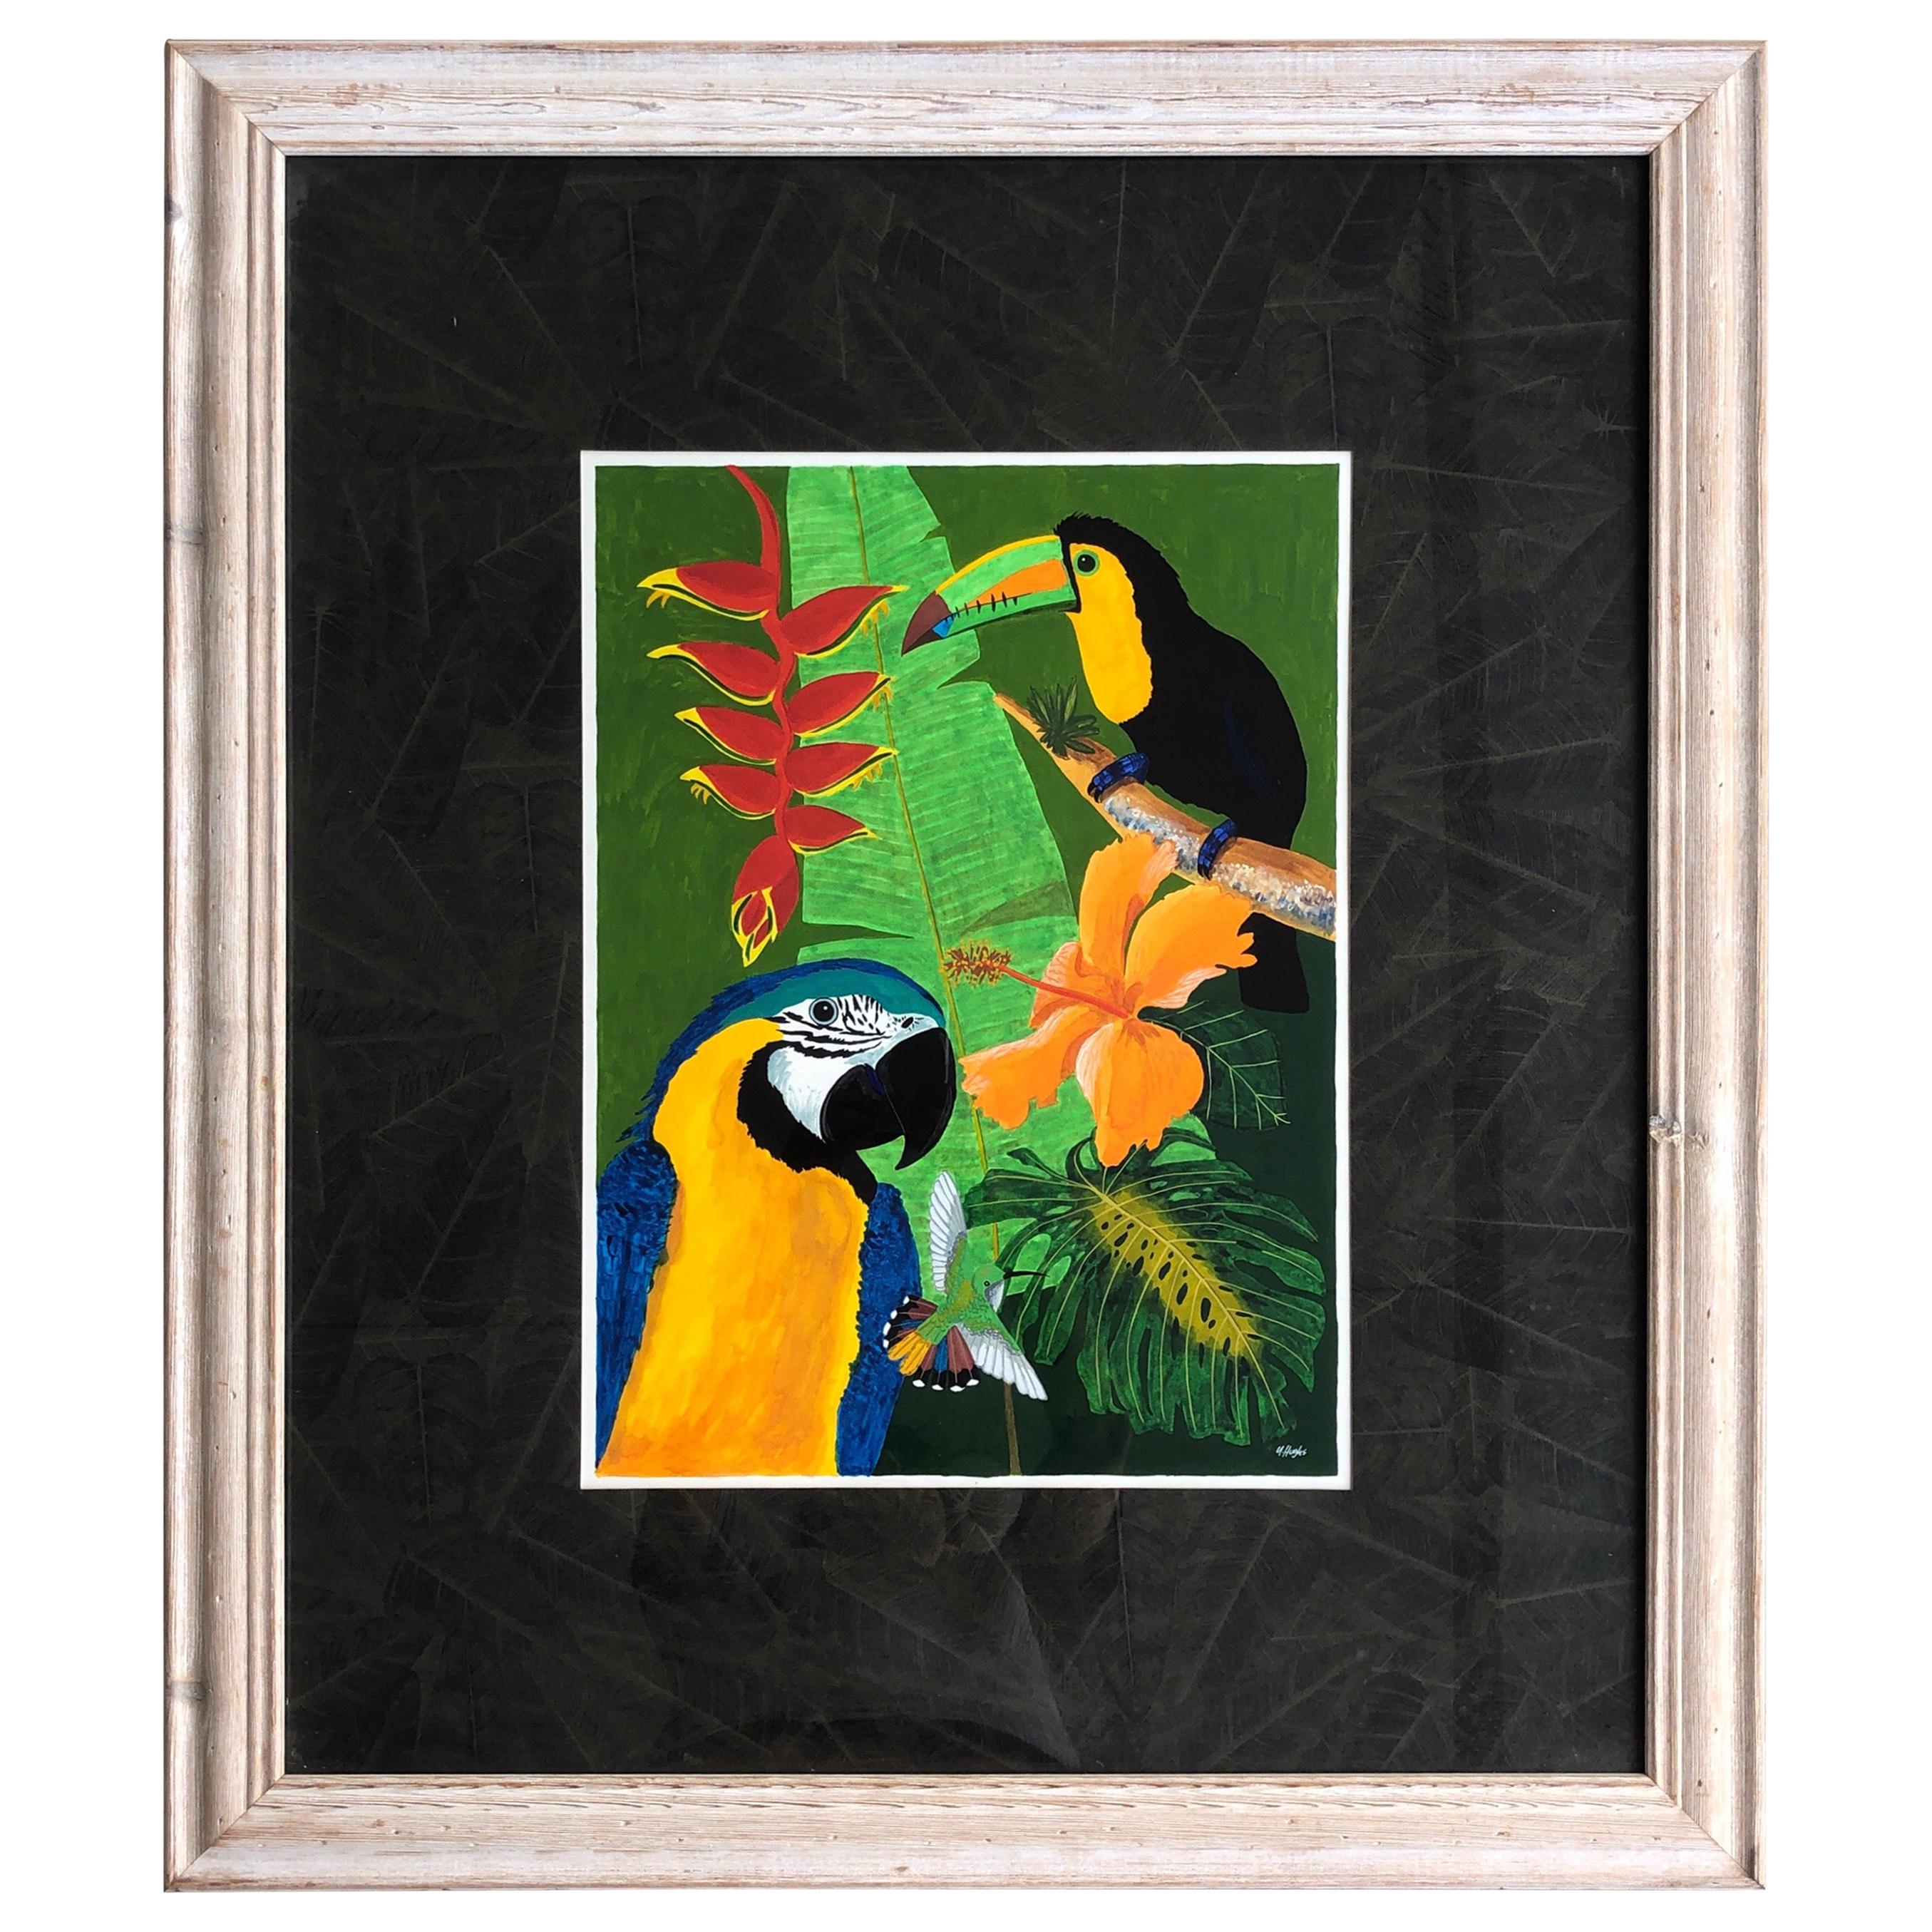 Hughs Tropical Modern Painting of Parrot Birds and Flowers